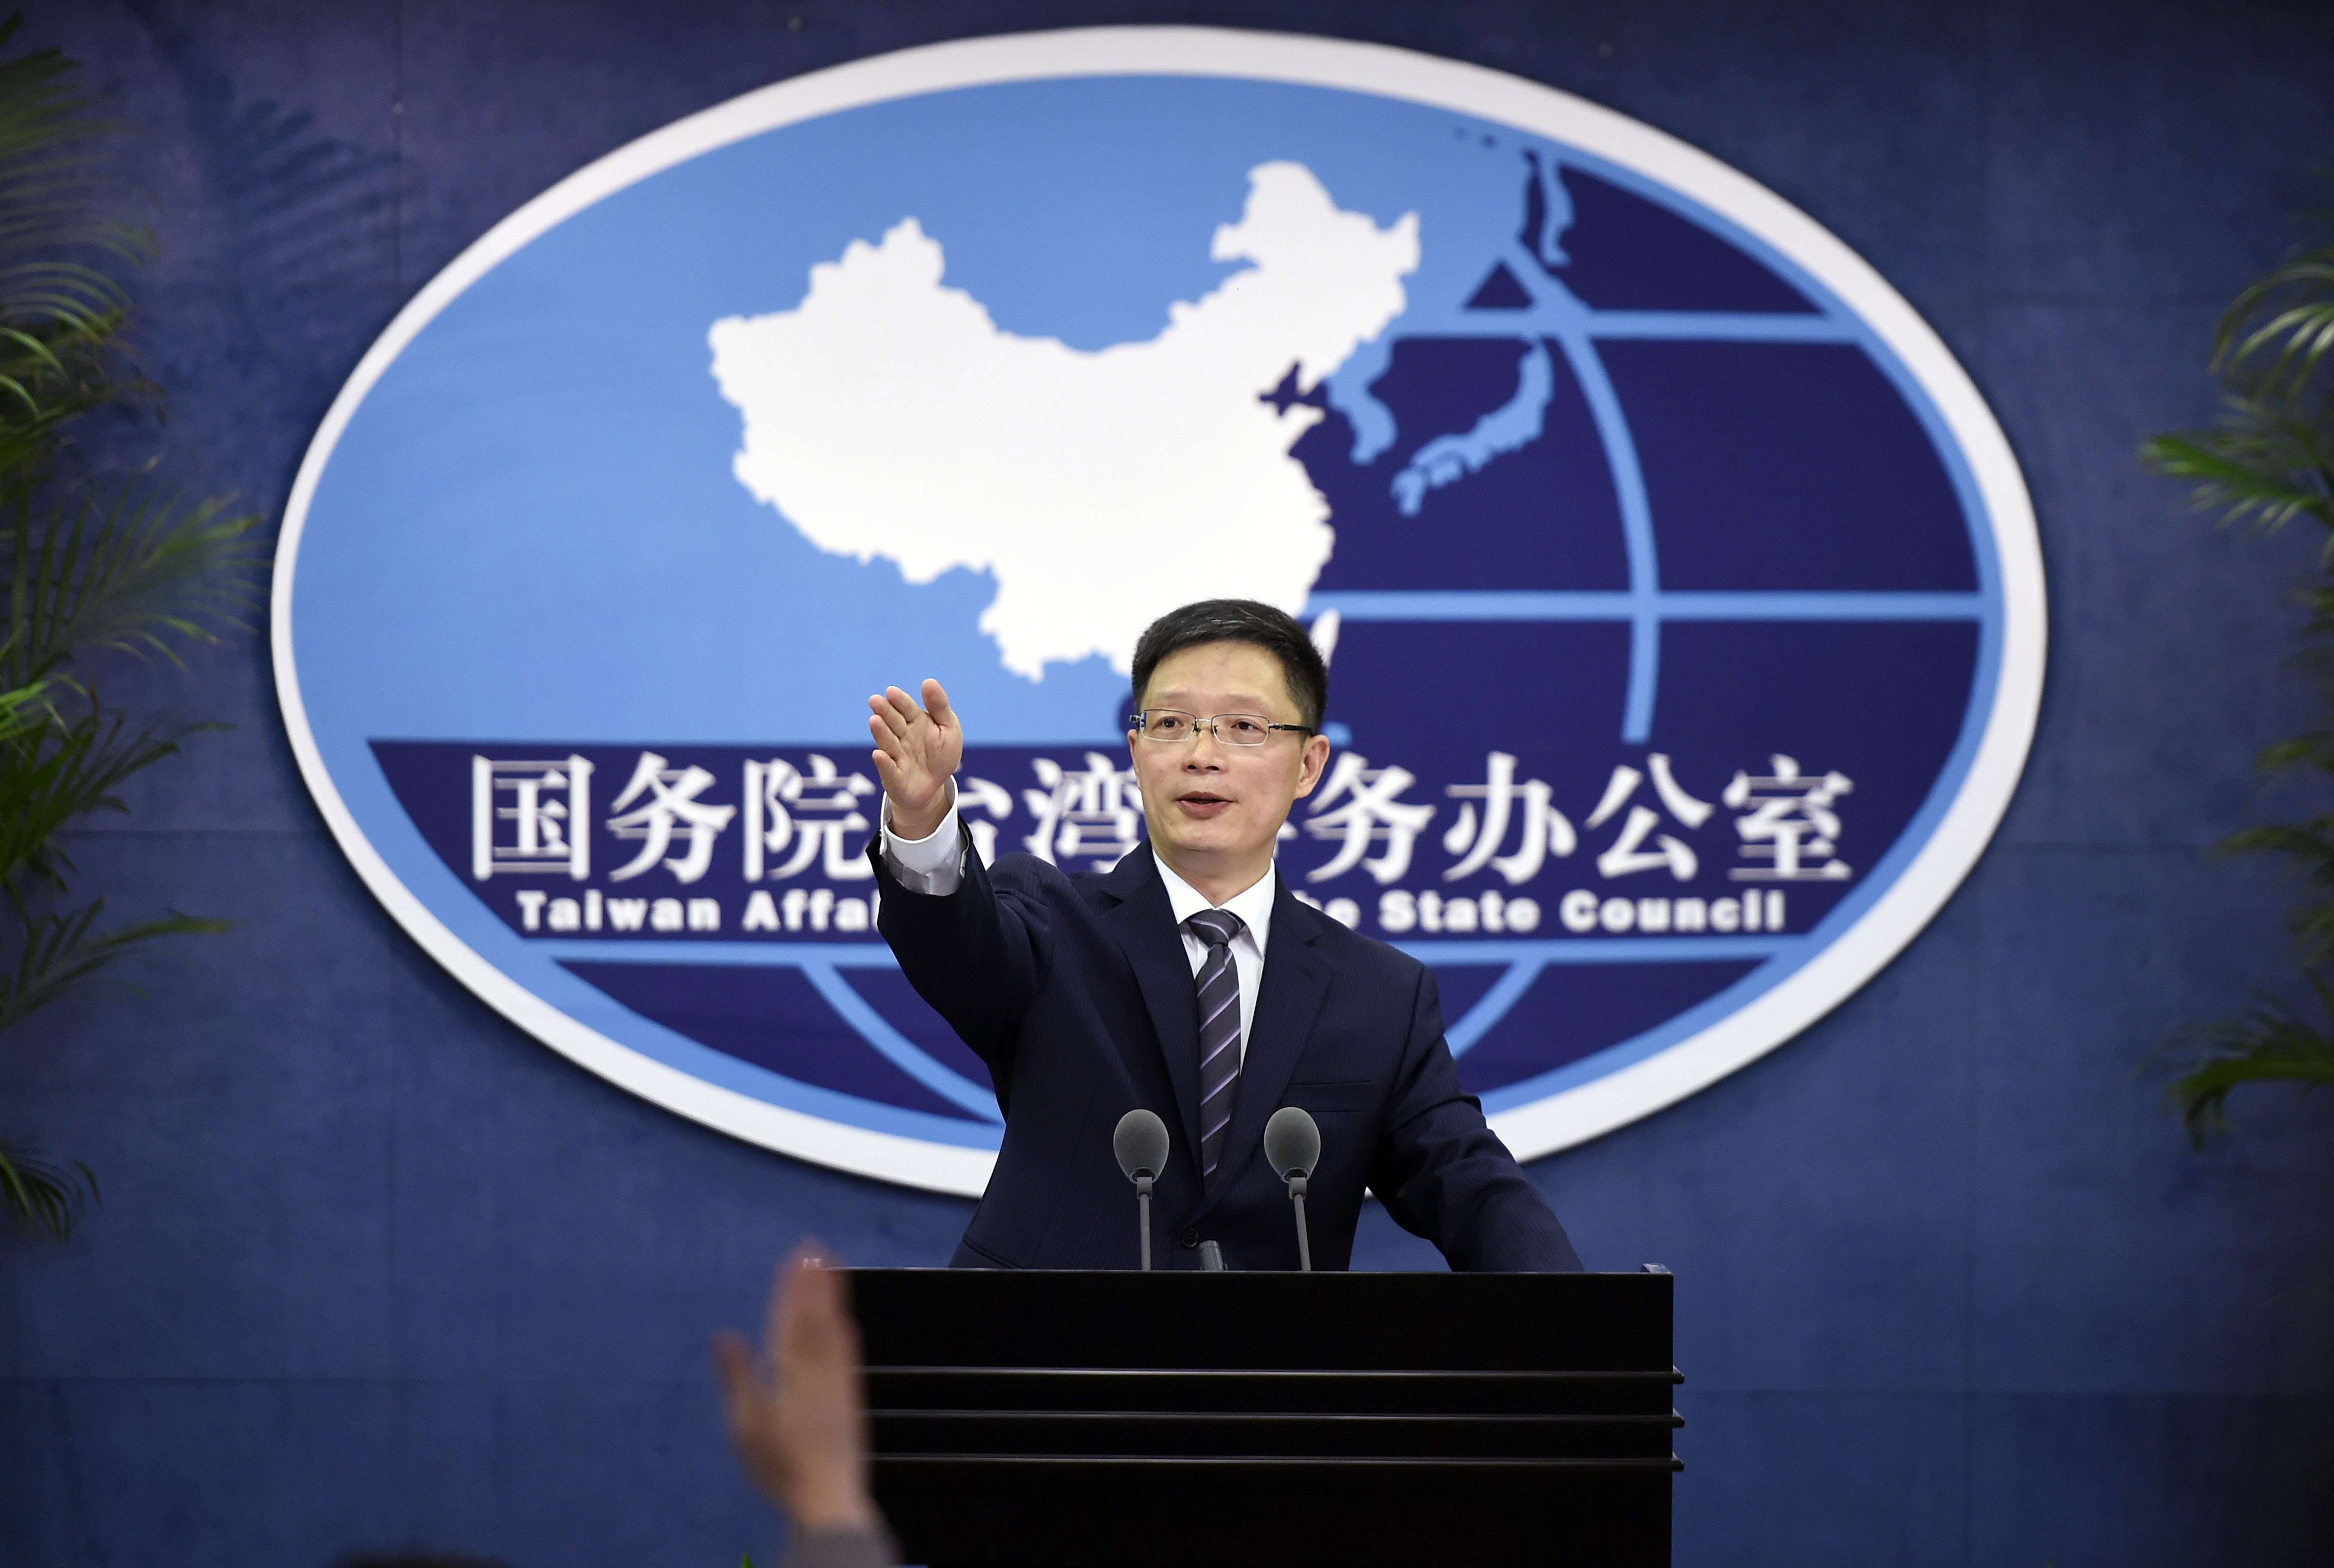 An Fengshan, a spokesman for the Taiwan Affairs Office, made the comments on Wednesday. Photo: Xinhua